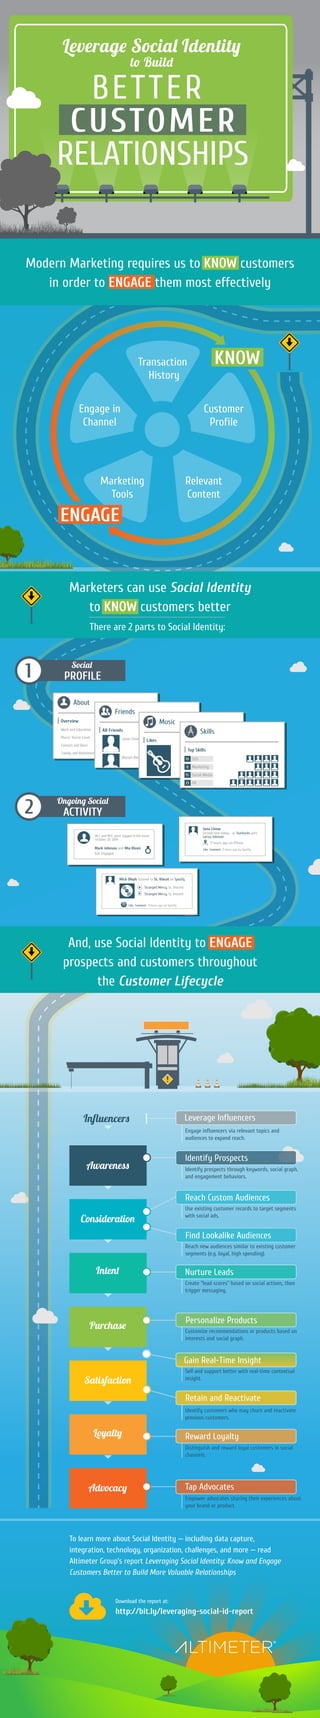 Leverag Socia Identit 
t Buil 
BETTER 
CUSTOMER 
RELATIONSHIPS 
Modern Marketing requires us to KNOW customers 
in order to ENGAGE them most effectively 
Transaction 
History 
Customer 
Profile 
Relevant 
Content 
Engage in 
Channel 
Marketers can use Social Identity 
to KNOW customers better 
There are 2 parts to Social Identity: 
And, use Social Identity to ENGAGE 
prospects and customers throughout 
the Customer Lifecycle 
Identify prospects through keywords, social graph, 
and engagement behaviors. 
Reach Custom Audiences 
Use existing customer records to target segments 
with social ads. 
Find Lookalike Audiences 
Reach new audiences similar to existing customer 
segments (e.g. loyal, high spending). 
Create “lead scores” based on social actions, then 
trigger messaging. 
Customize recommendations or products based on 
interests and social graph. 
Sell and support better with real-time contextual 
insight. 
Identify customers who may churn and reactivate 
previous customers. 
Distinguish and reward loyal customers in social 
channels. 
M.J. and M.K. were tagged in life event 
October 20, 2014 
M.J. and M.K. were tagged in life event 
October 20, 2014 
Download the report at: 
http://bit.ly/leveraging-social-id-report 
1 Socia 
PROFILE 
2 Ongoin Socia 
ACTIVITY 
Awarenes 
Consideratio 
Inten 
Purchas 
Satisfactio 
Loyalt 
Advocac 
Identify Prospects 
Nurture Leads 
Personalize Products 
Gain Real-Time Insight 
Retain and Reactivate 
Reward Loyalty 
Tap Advocates 
Empower advocates sharing their experiences about 
your brand or product. 
About 
Overview 
Work and Education 
Places You’ve Lived 
Contact and Basic 
Family and Relationships 
Friends 
All Friends 
Jason Clover 
Mariah Blond 
Music 
Likes 
Skills 
Top Skills 
10 SEO 
8 Marketing 
15 Social Media 
23 PR 
Mark Johnson and Mia Klovic 
Got Engaged 
Mick Oleph listened to St. Vincet on Spotify 
Stranged Mercy, St. Vincent 
Stranged Mercy, St. Vincent 
Like Comment 11 hours ago via Spotify 
Jana Linow 
Second time today - at Starbucks with 
Larisa Johnson 
17 hours ago via iPhone 
Like Comment 11 hours ago via Spotify 
About 
Overview 
Work and Education 
Places You’ve Lived 
Contact and Basic 
Family and Relationships 
Friends 
All Friends 
Jason Clover 
Mariah Blond 
Music 
Likes 
Skills 
Top Skills 
10 SEO 
8 Marketing 
15 Social Media 
23 PR 
Mark Johnson and Mia Klovic 
Got Engaged 
Mick Oleph listened to St. Vincet on Spotify 
Stranged Mercy, St. Vincent 
Stranged Mercy, St. Vincent 
Like Comment 11 hours ago via Spotify 
Jana Linow 
Second time today - at Starbucks with 
Larisa Johnson 
17 hours ago via iPhone 
Like Comment 11 hours ago via Spotify 
Influencer Leverage Influencers 
Engage influencers via relevant topics and 
audiences to expand reach. 
Marketing 
Tools 
KNOW 
ENGAGE 
To learn more about Social Identity — including data capture, 
integration, technology, organization, challenges, and more — read 
Altimeter Group’s report Leveraging Social Identity: Know and Engage 
Customers Better to Build More Valuable Relationships 
